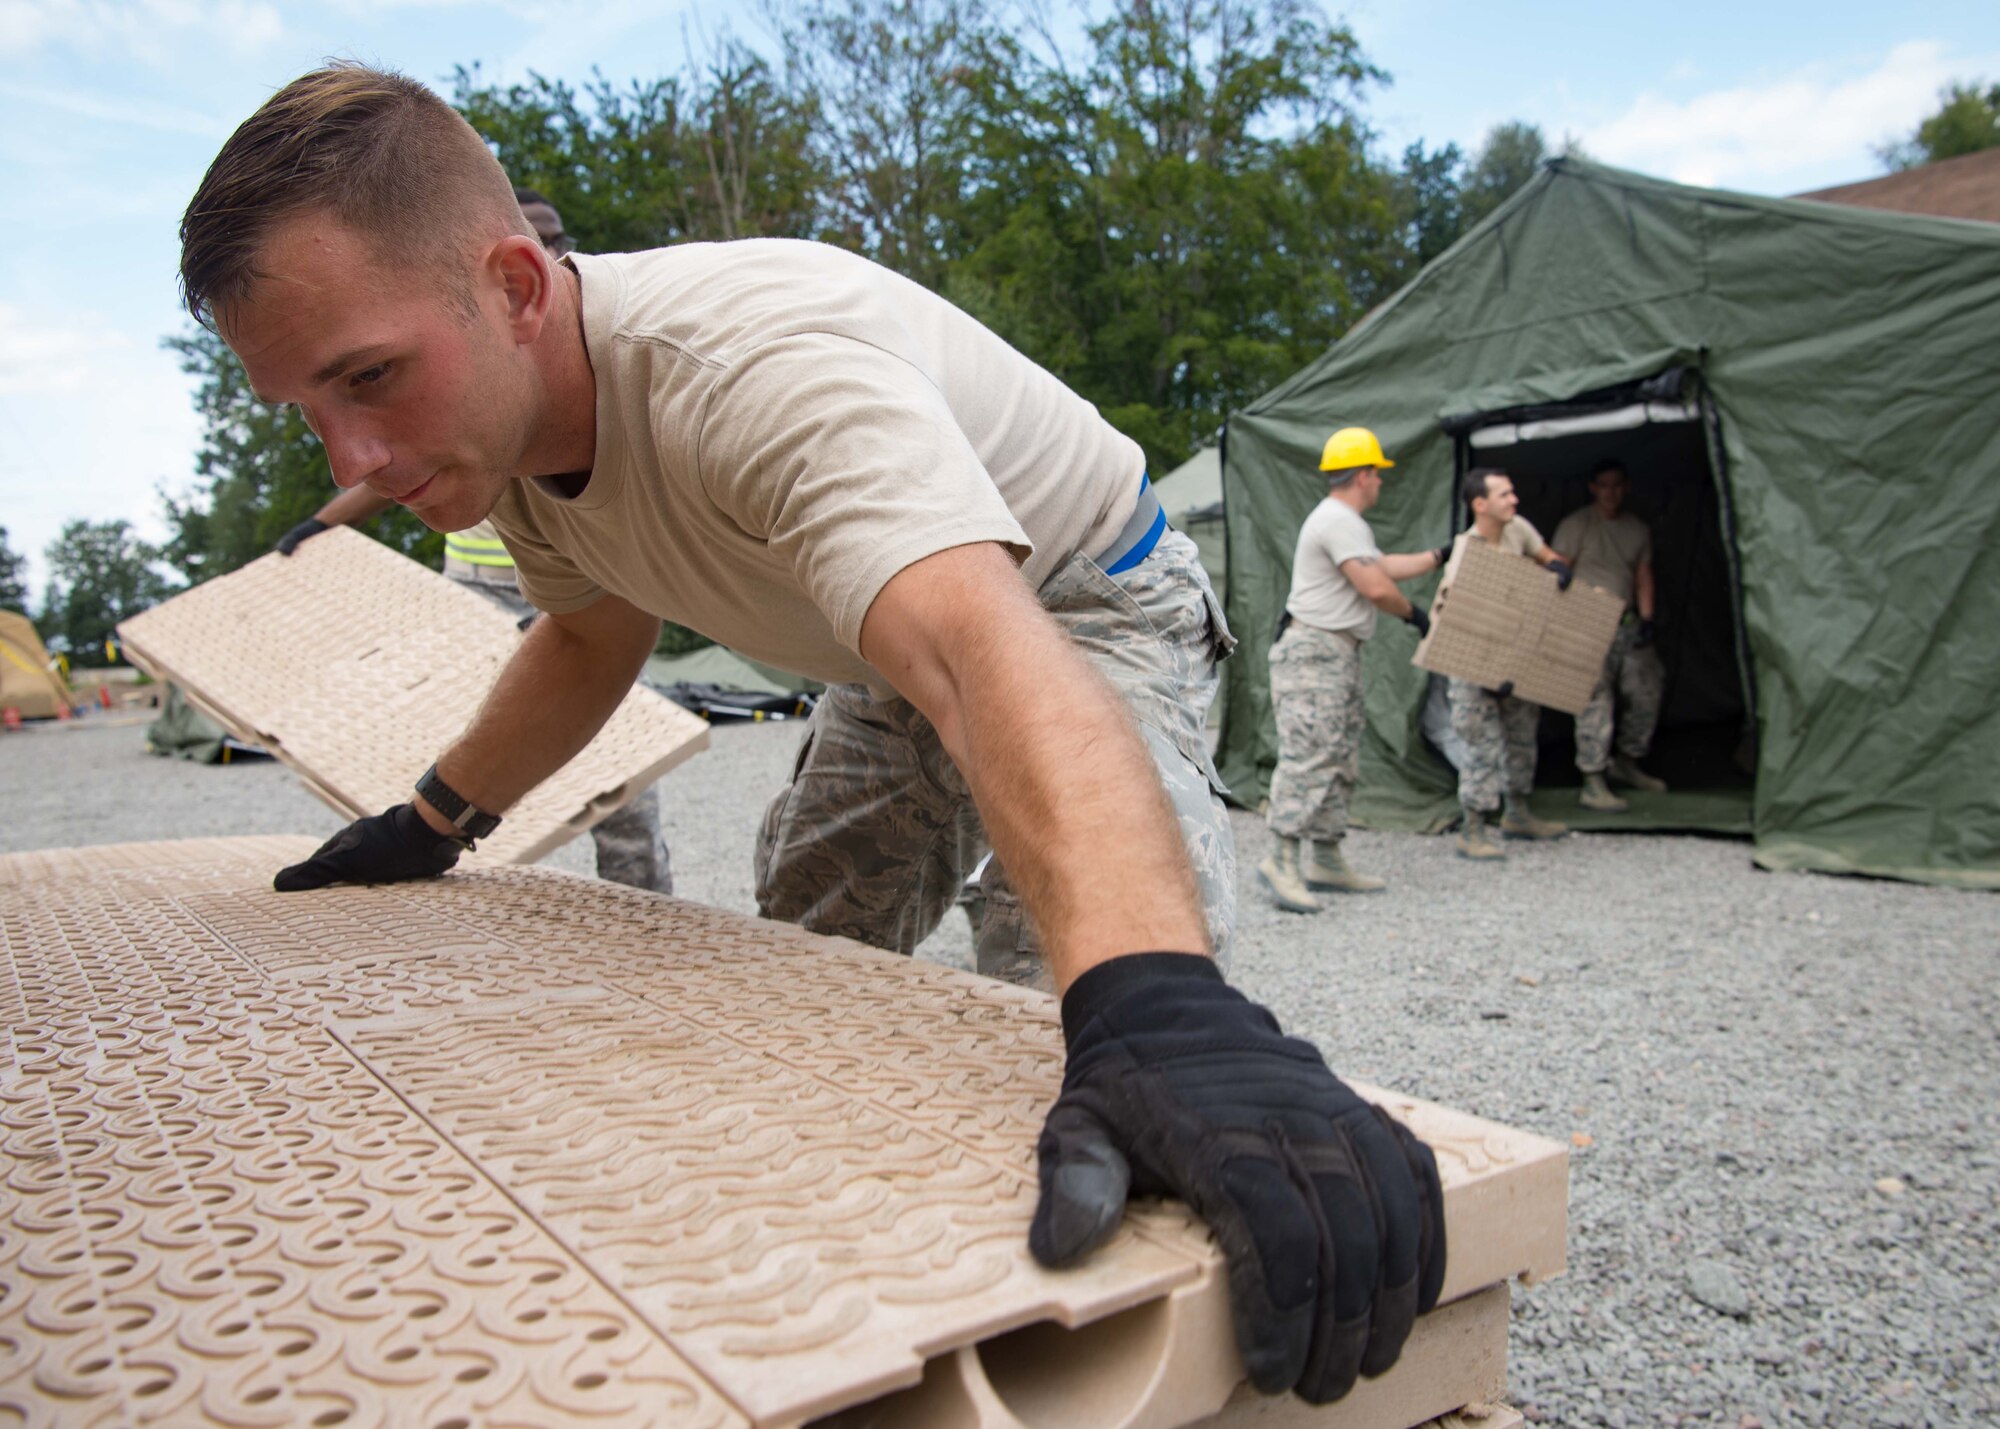 U.S. Air Force Senior Airman Zackery Powers, 1st Combat Communications Squadron radio frequency technician, hands flooring tiles to an assembly line to construct a communications tent during Exercise Lending Hand on Ramstein Air Base, Germany, Aug. 21, 2017.